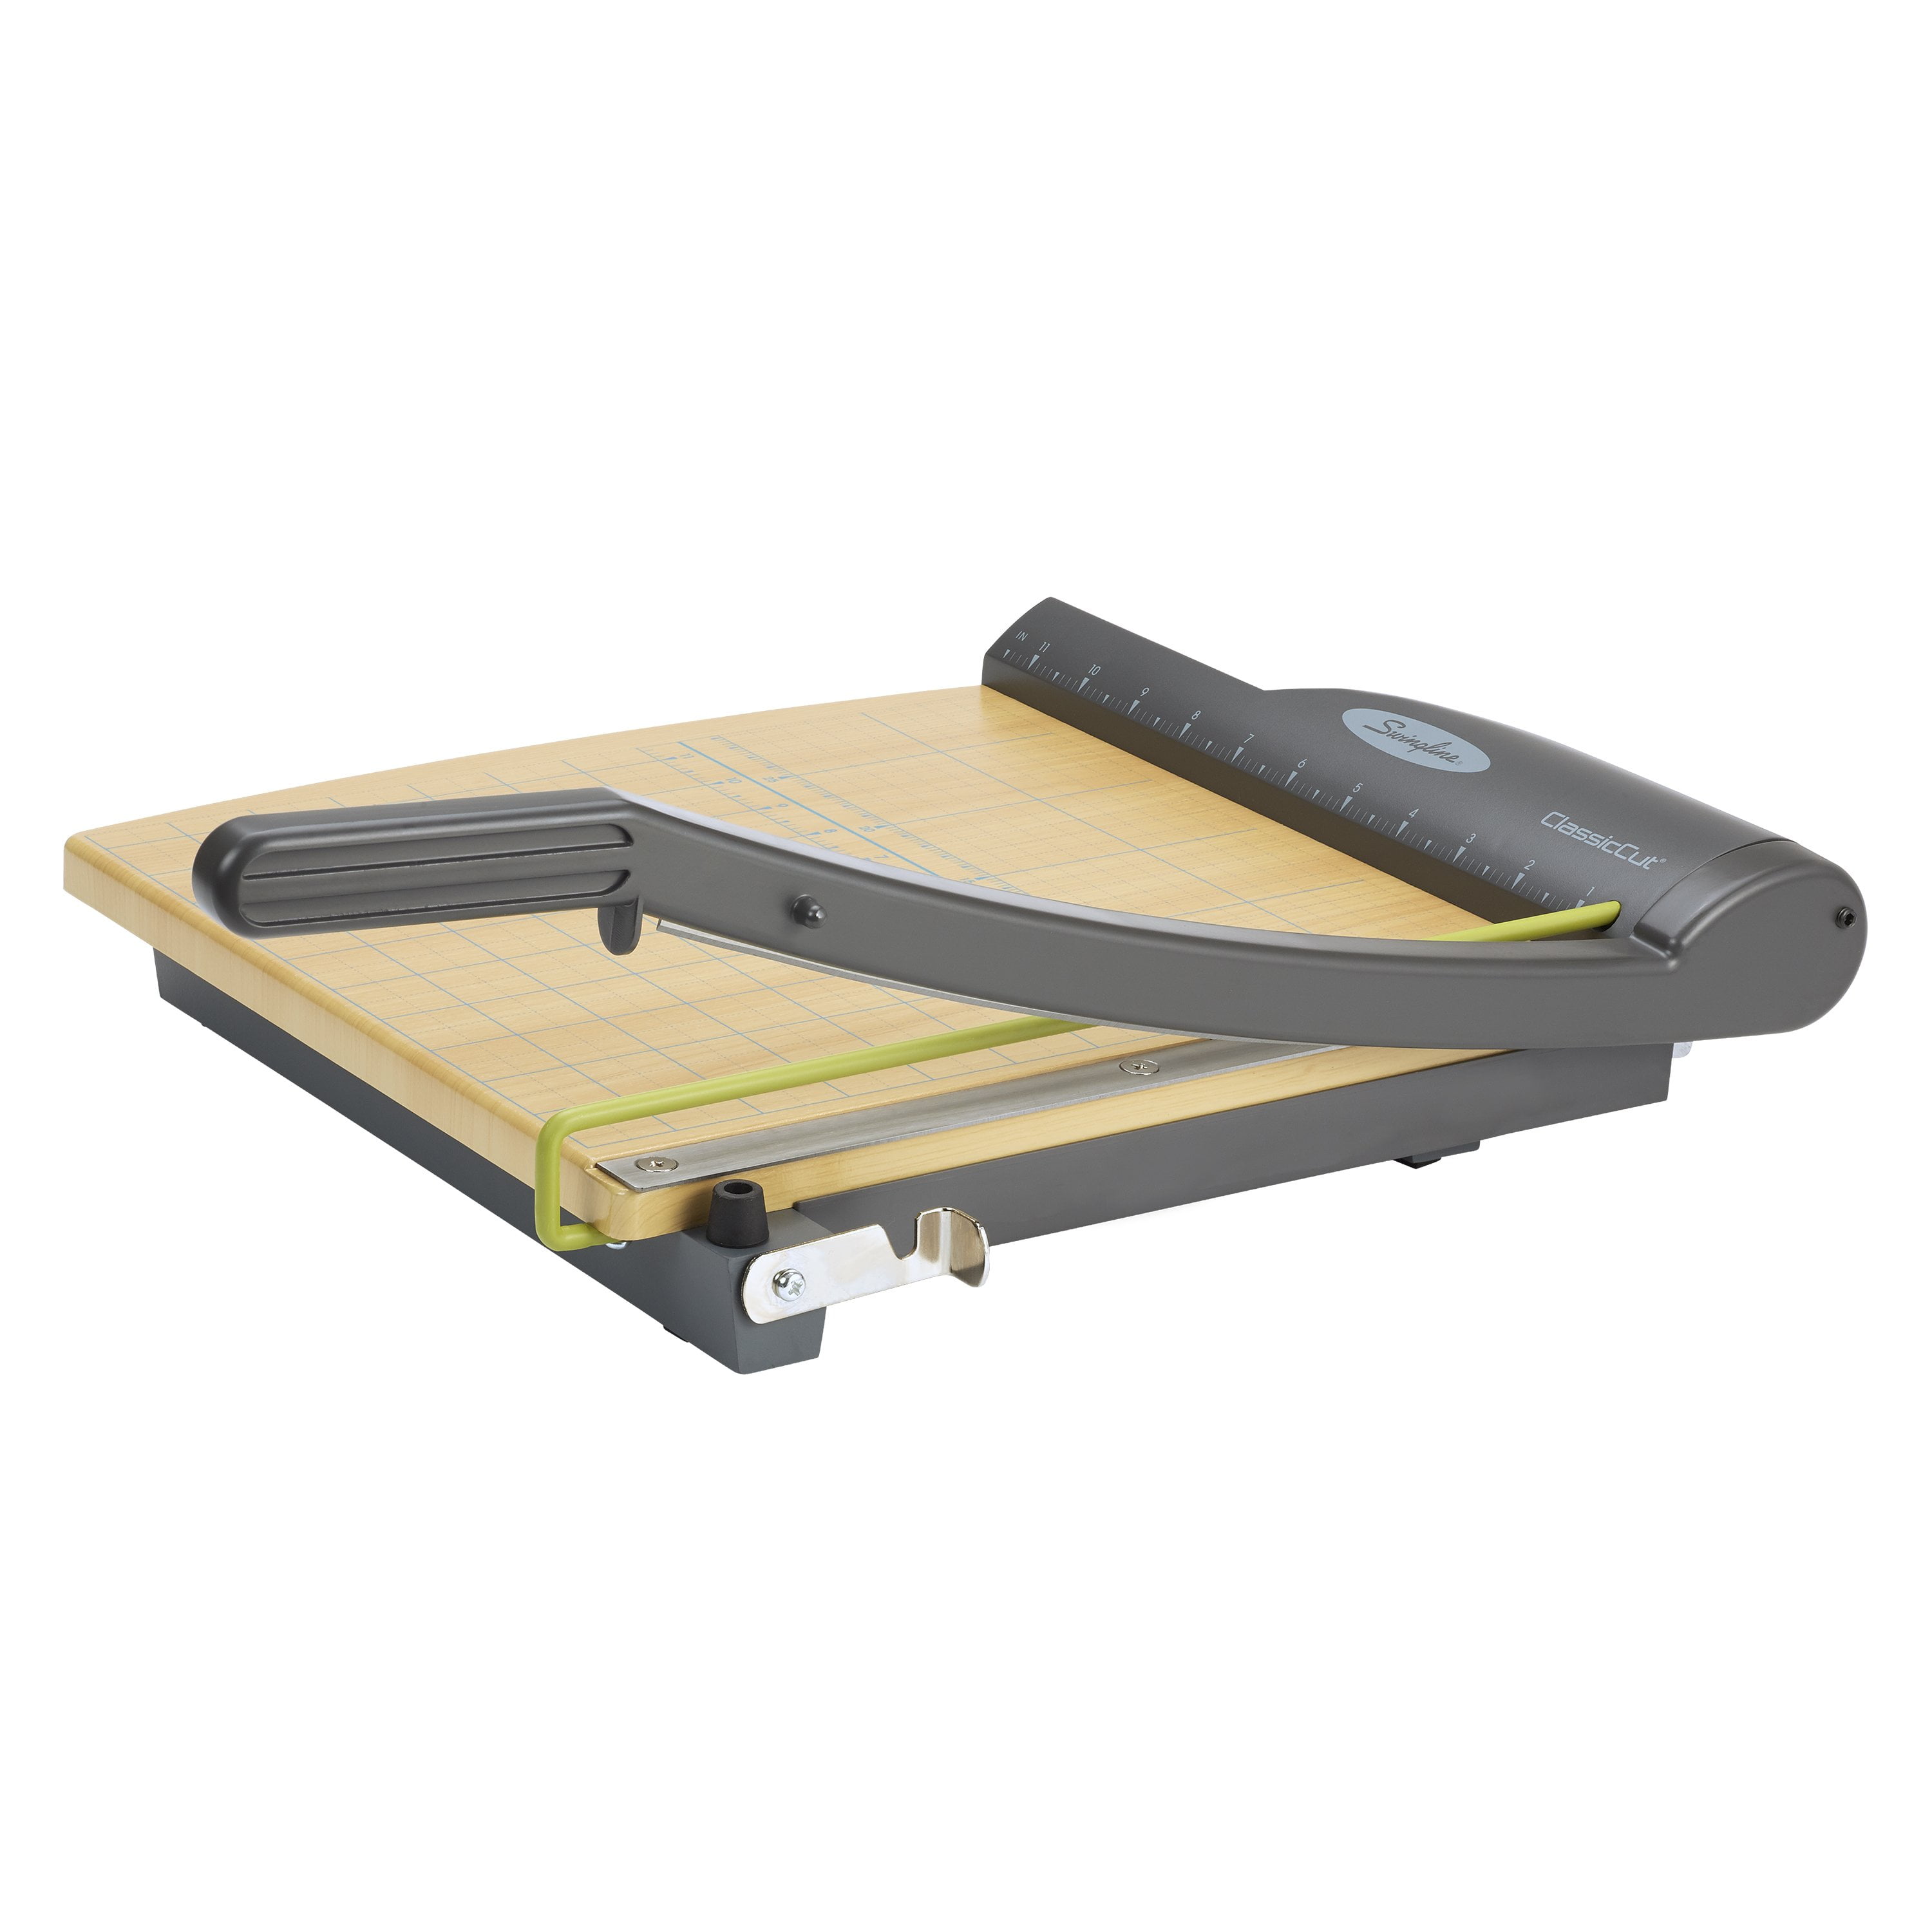 $12/mo - Finance Swingline Paper Cutter, Guillotine Trimmer with EdgeGlow  LED Cut Guide and Solid Wood Surface, 15 Cut Length, 10 Sheet Capacity,  ClassicCut 1510W (G7010002)